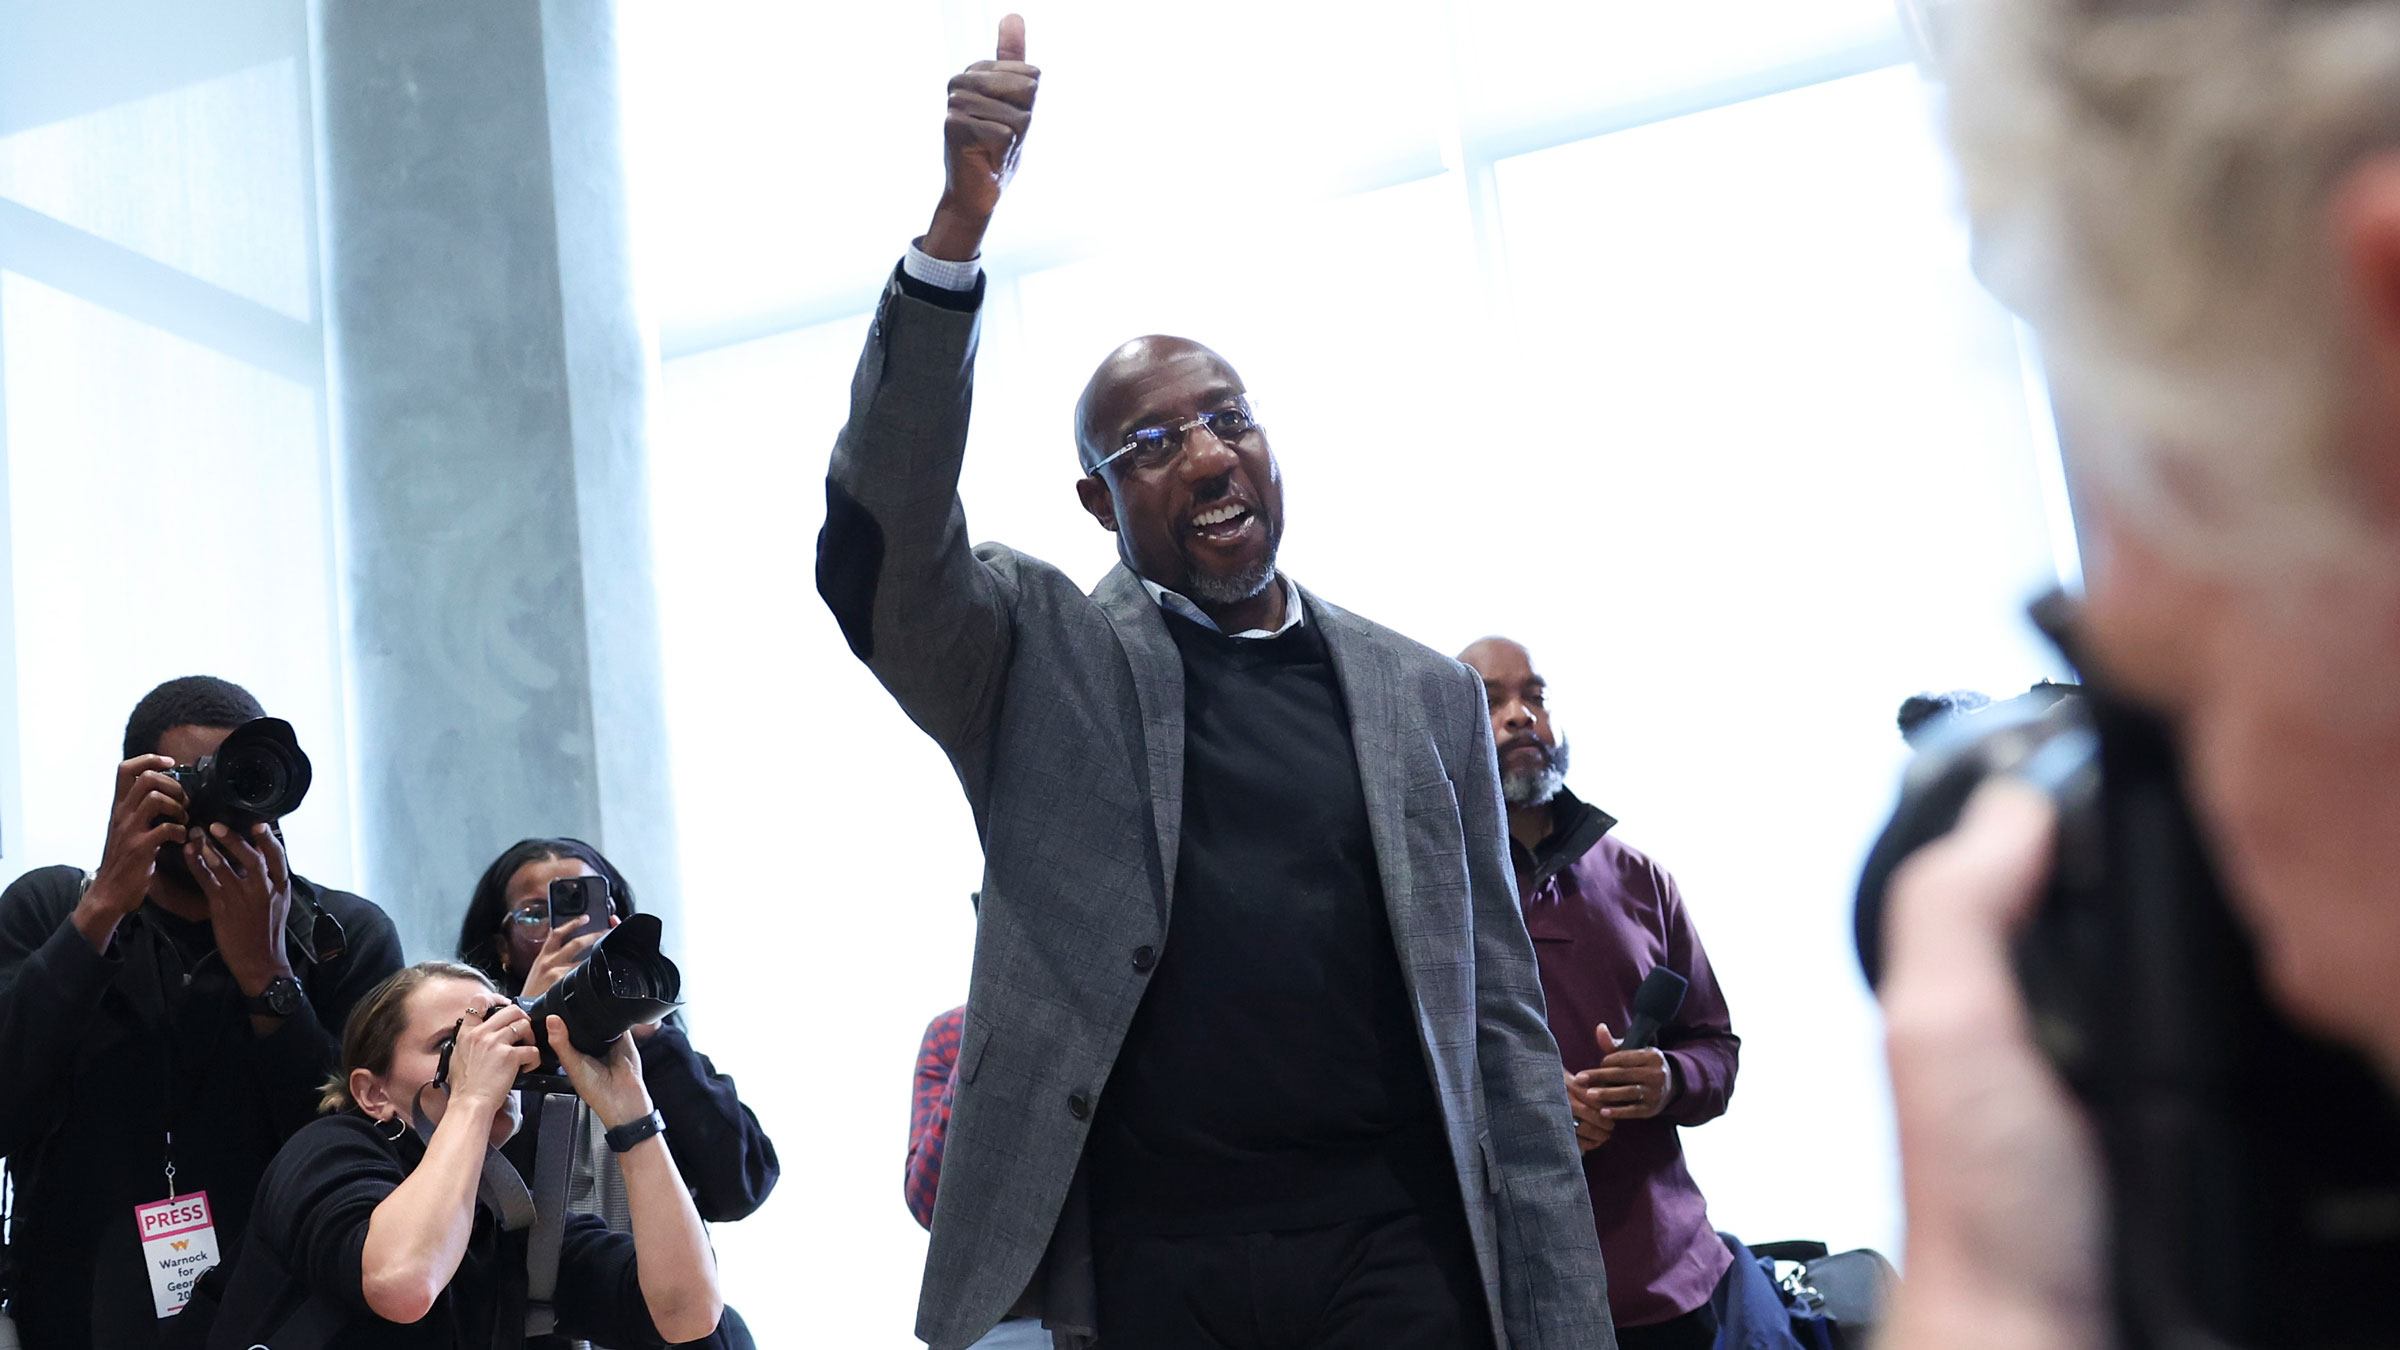 US Sen. Raphael Warnock gives a thumbs-up to supporters before speaking at a rally at Georgia Tech on Monday.